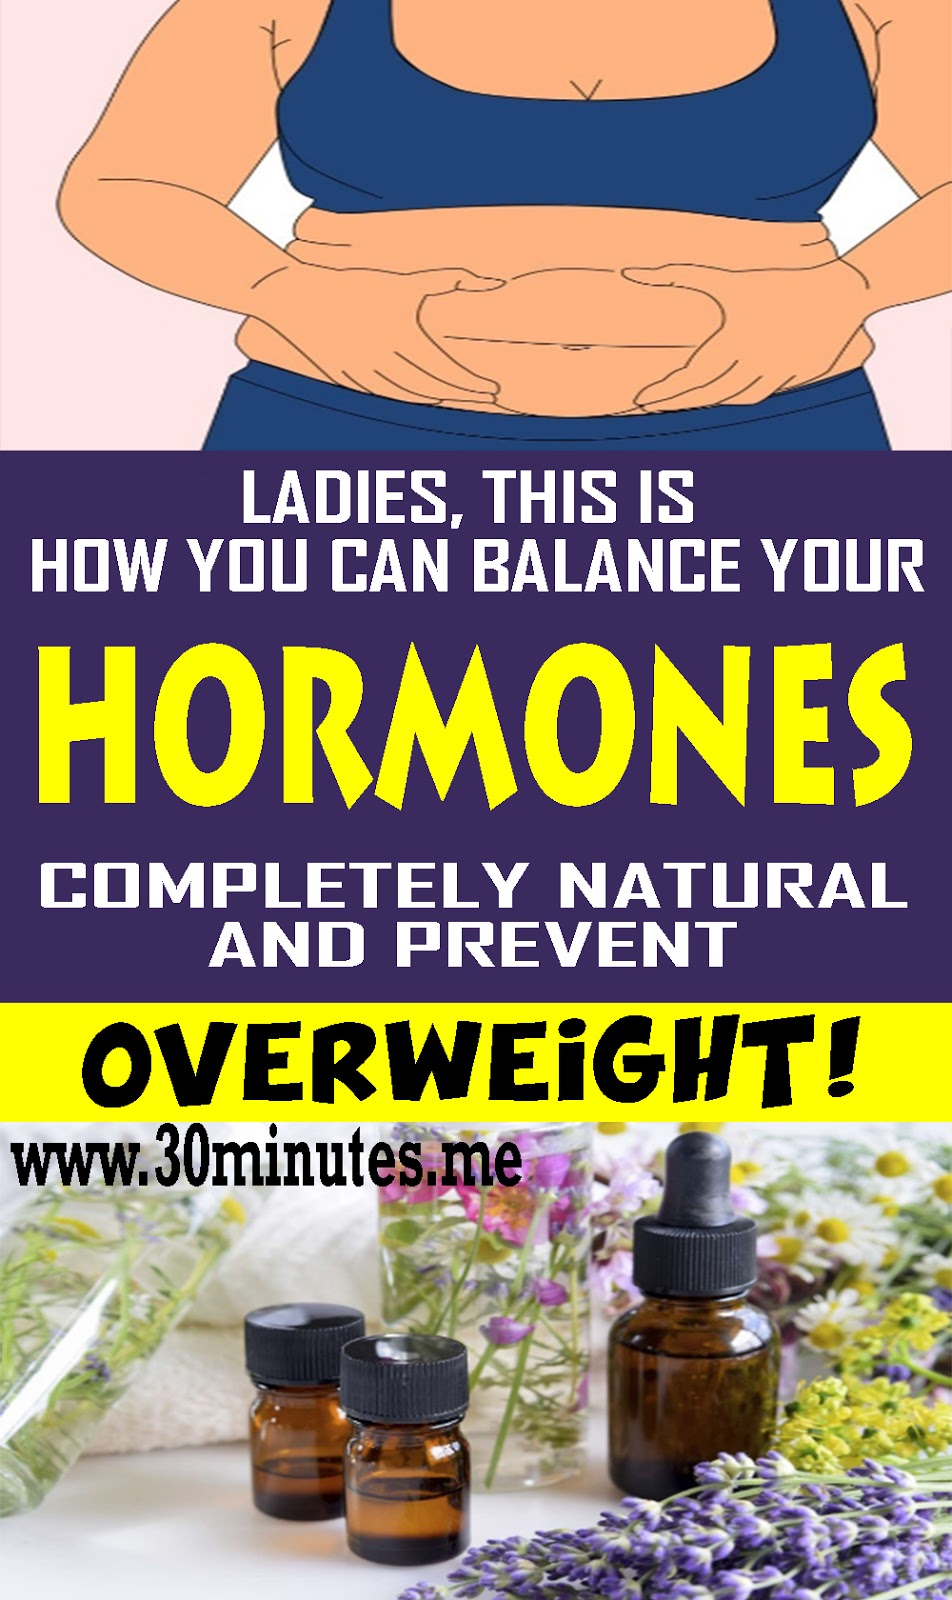 Here Is How To Balance Female Hormones Naturally!